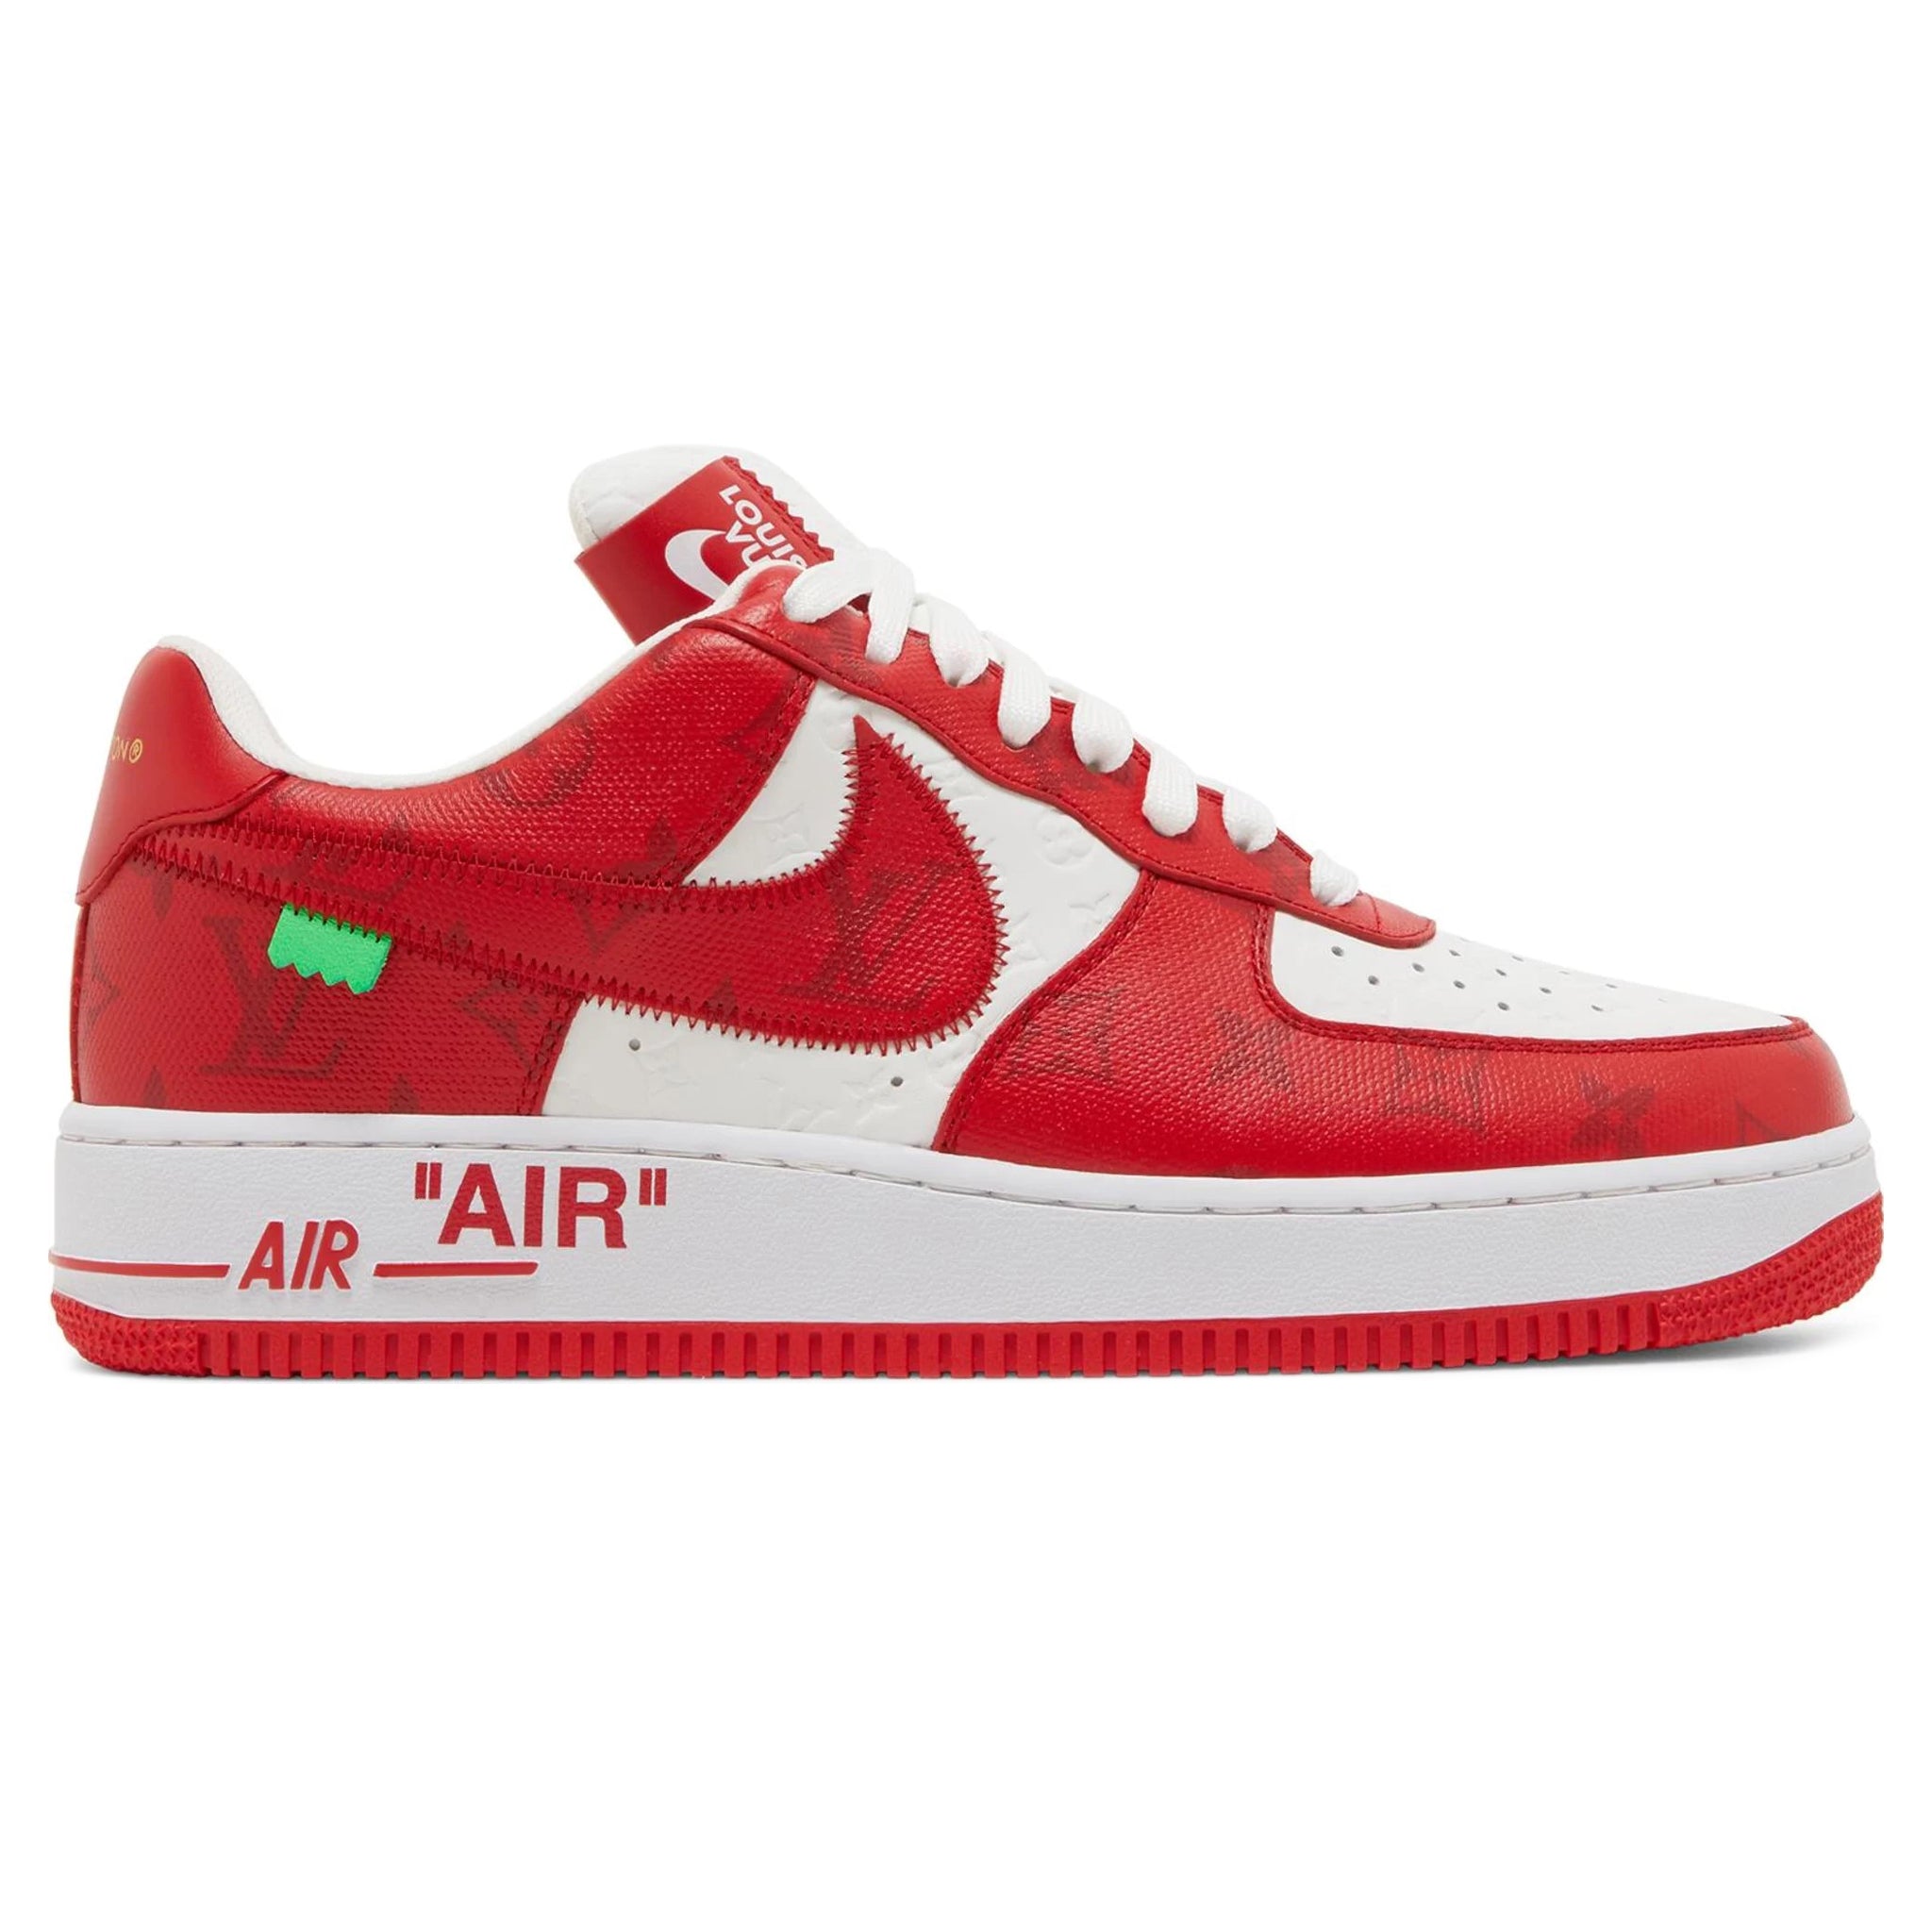 Louis Vuitton X Nike Air Force One Red White Flash Low Top Trainer